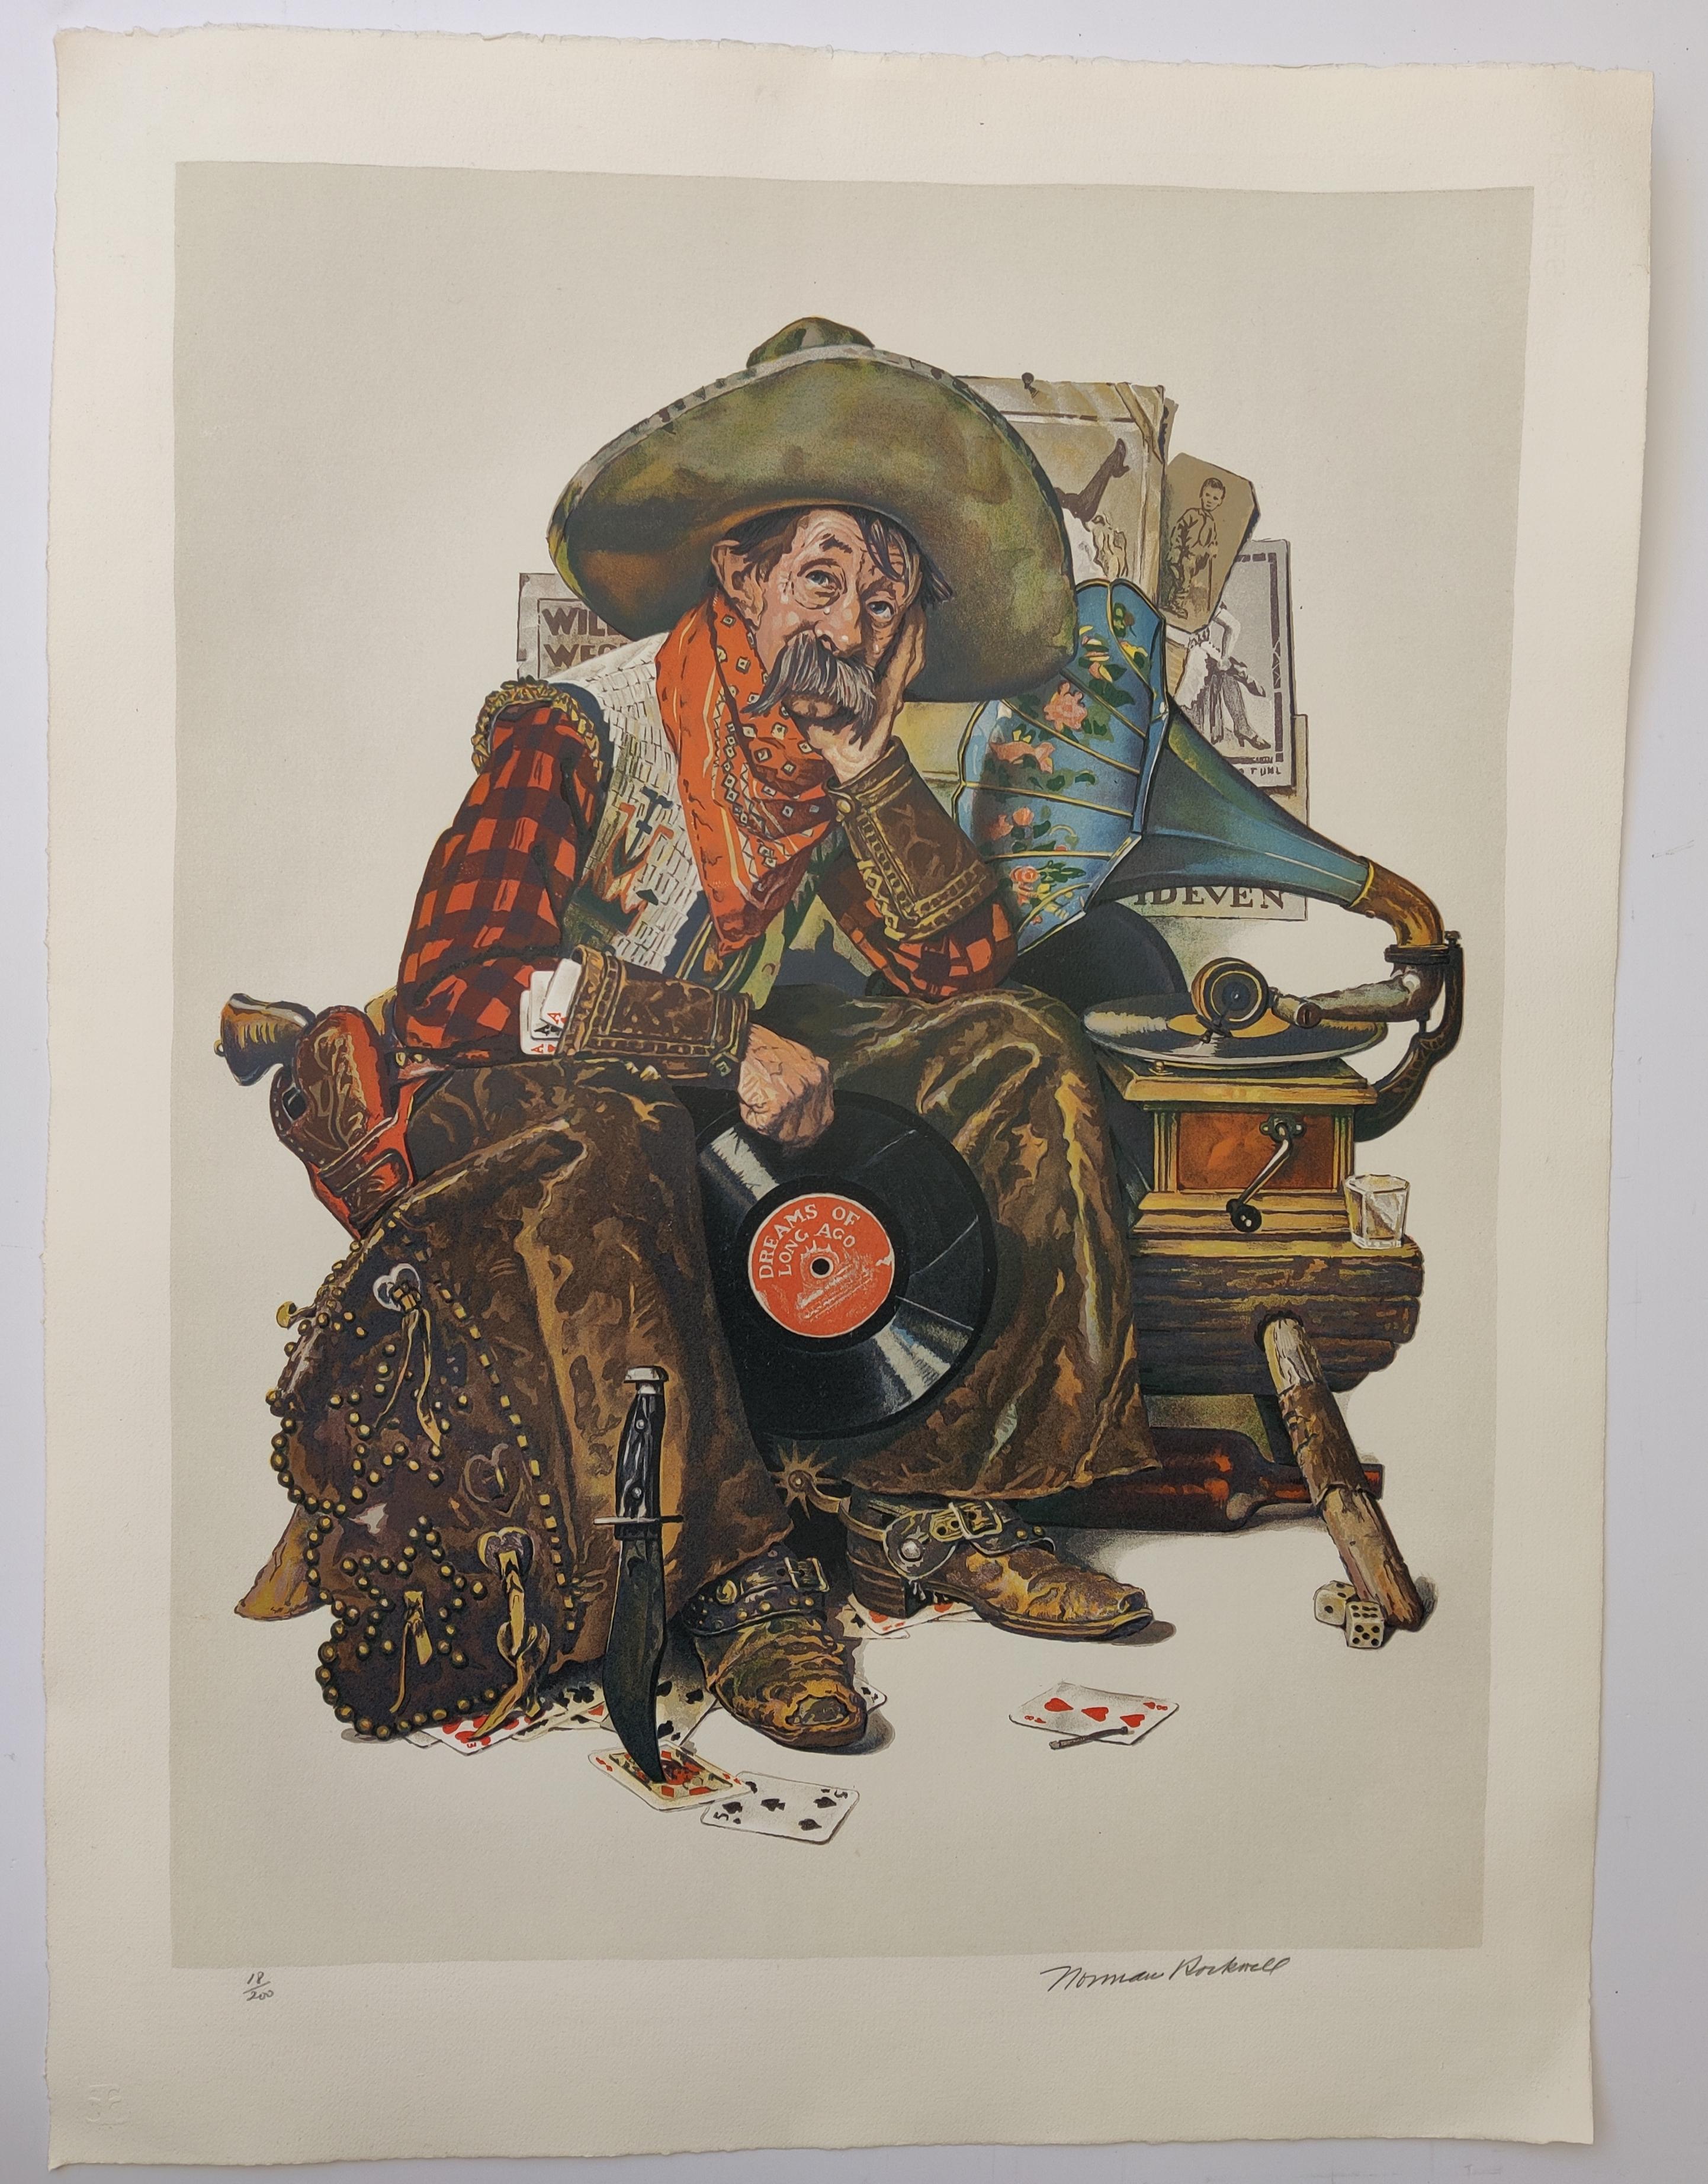 Norman Rockwell
Dreams of Long Ago,  1976 
Lithograph 
Hand signed lower right
Edition 18 / 200
Image size 68 x 51 cm
Sheet size 85 x 60 cm

Dreams of Long Ago/Cowboy with Gramophone created for the Cover illustration for The Saturday Evening Post